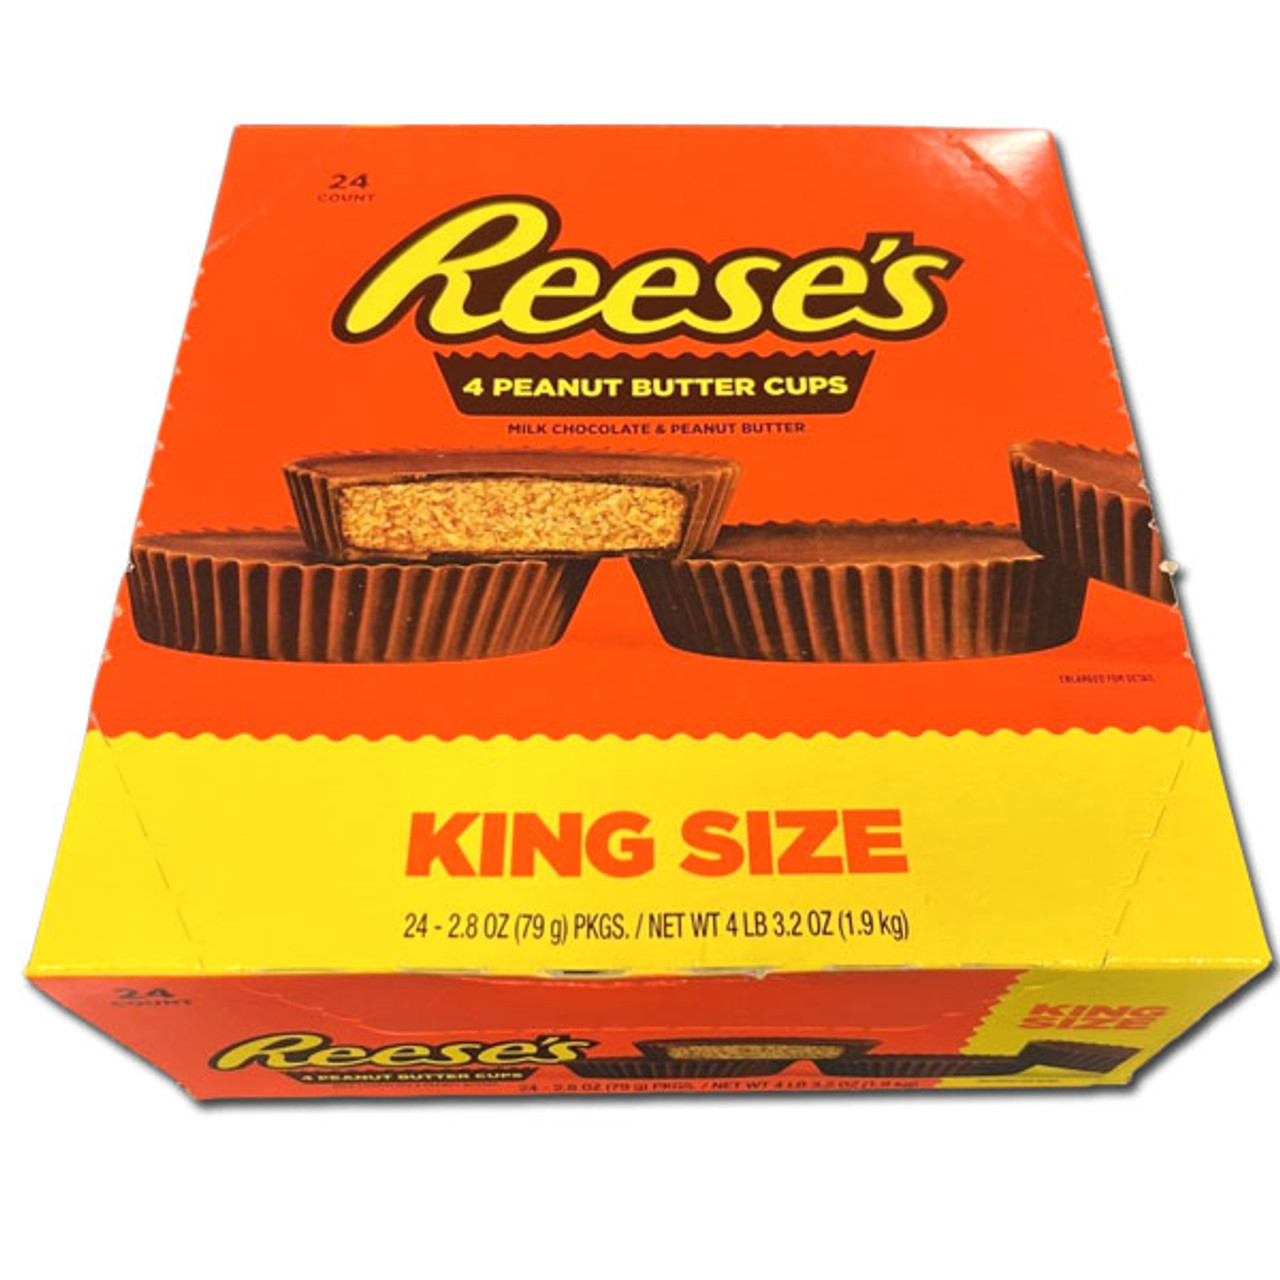 Reese's Peanut Butter Big Cups - 16 pack, 2.8 oz each